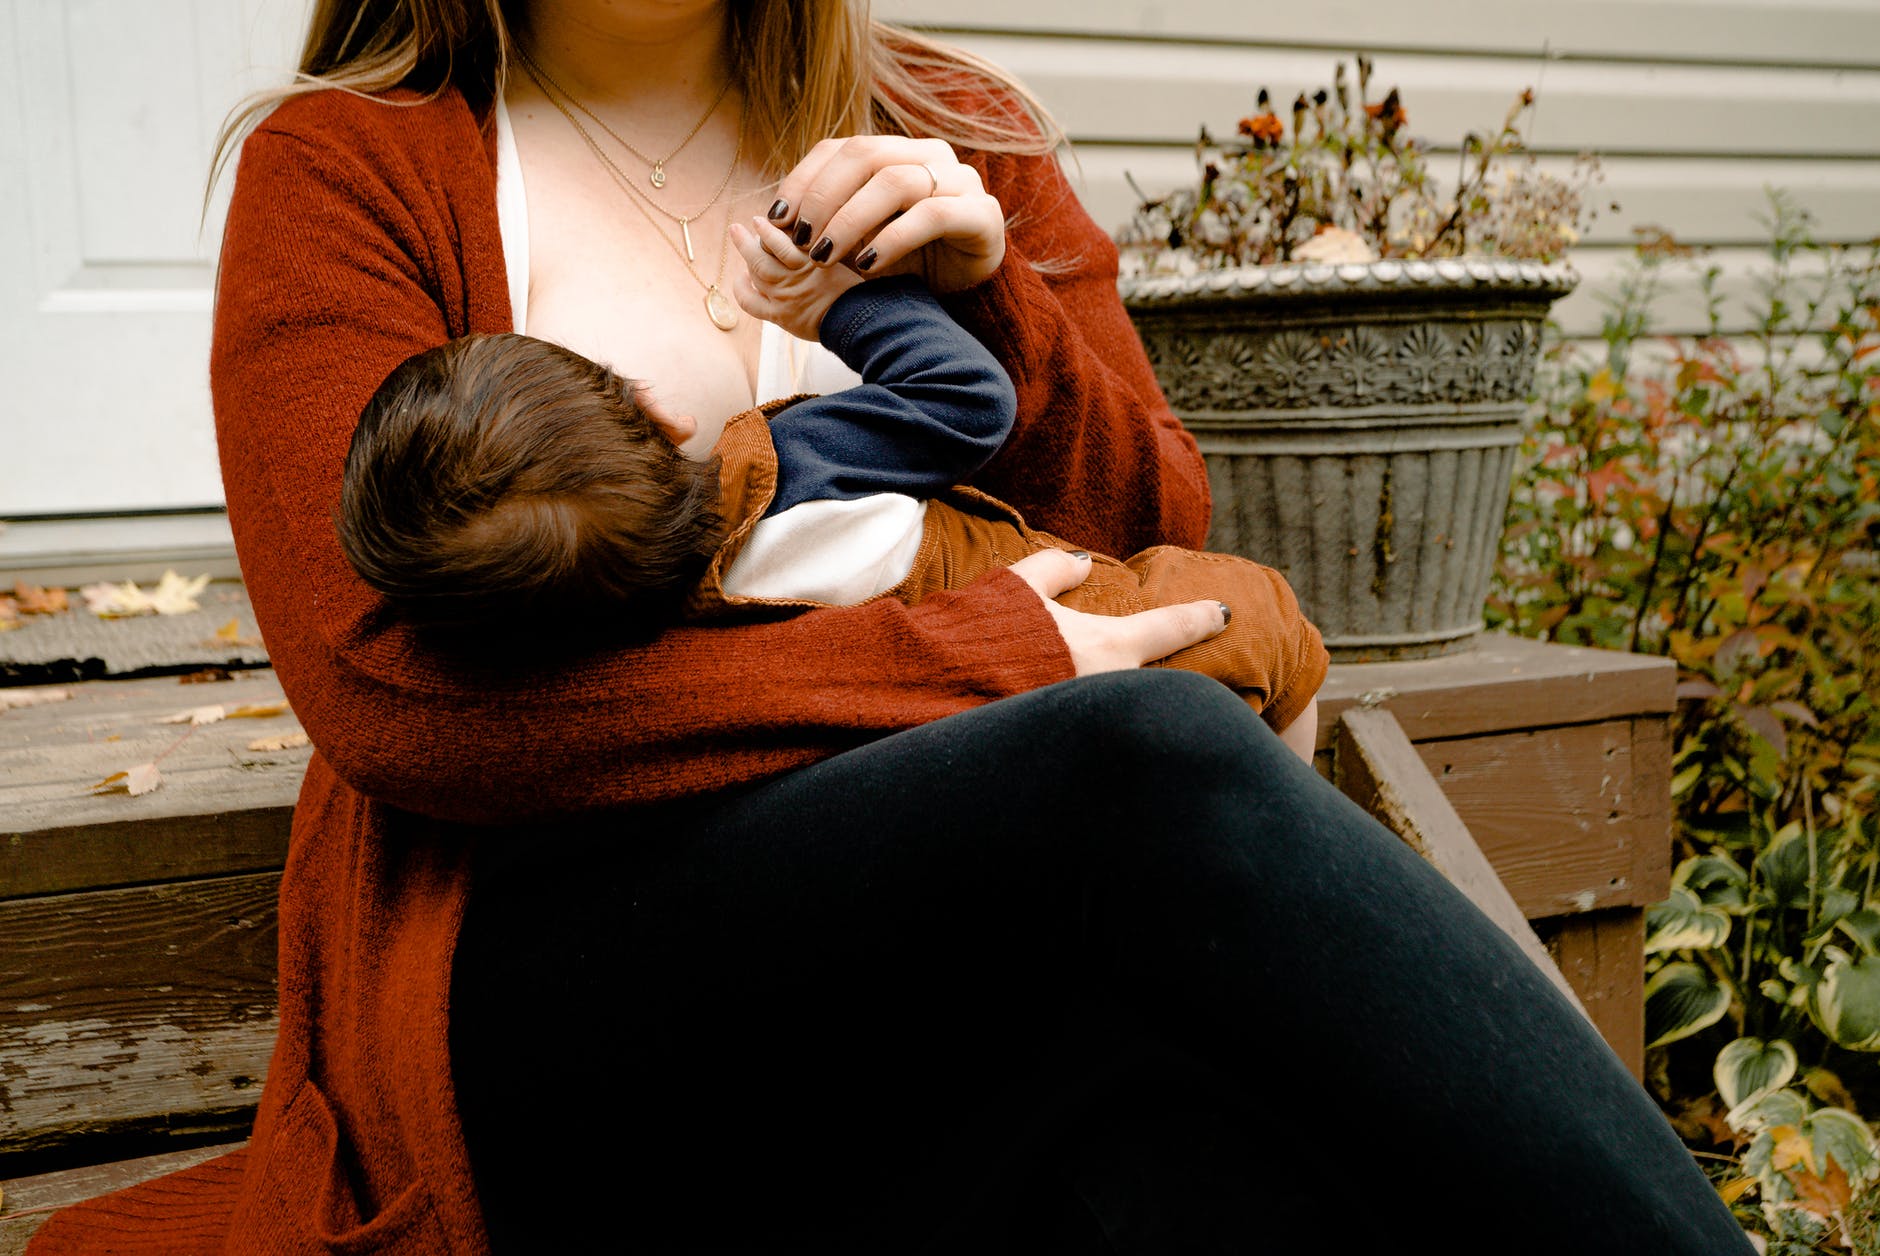 How Can Breastfeeding Problems Be Avoided?